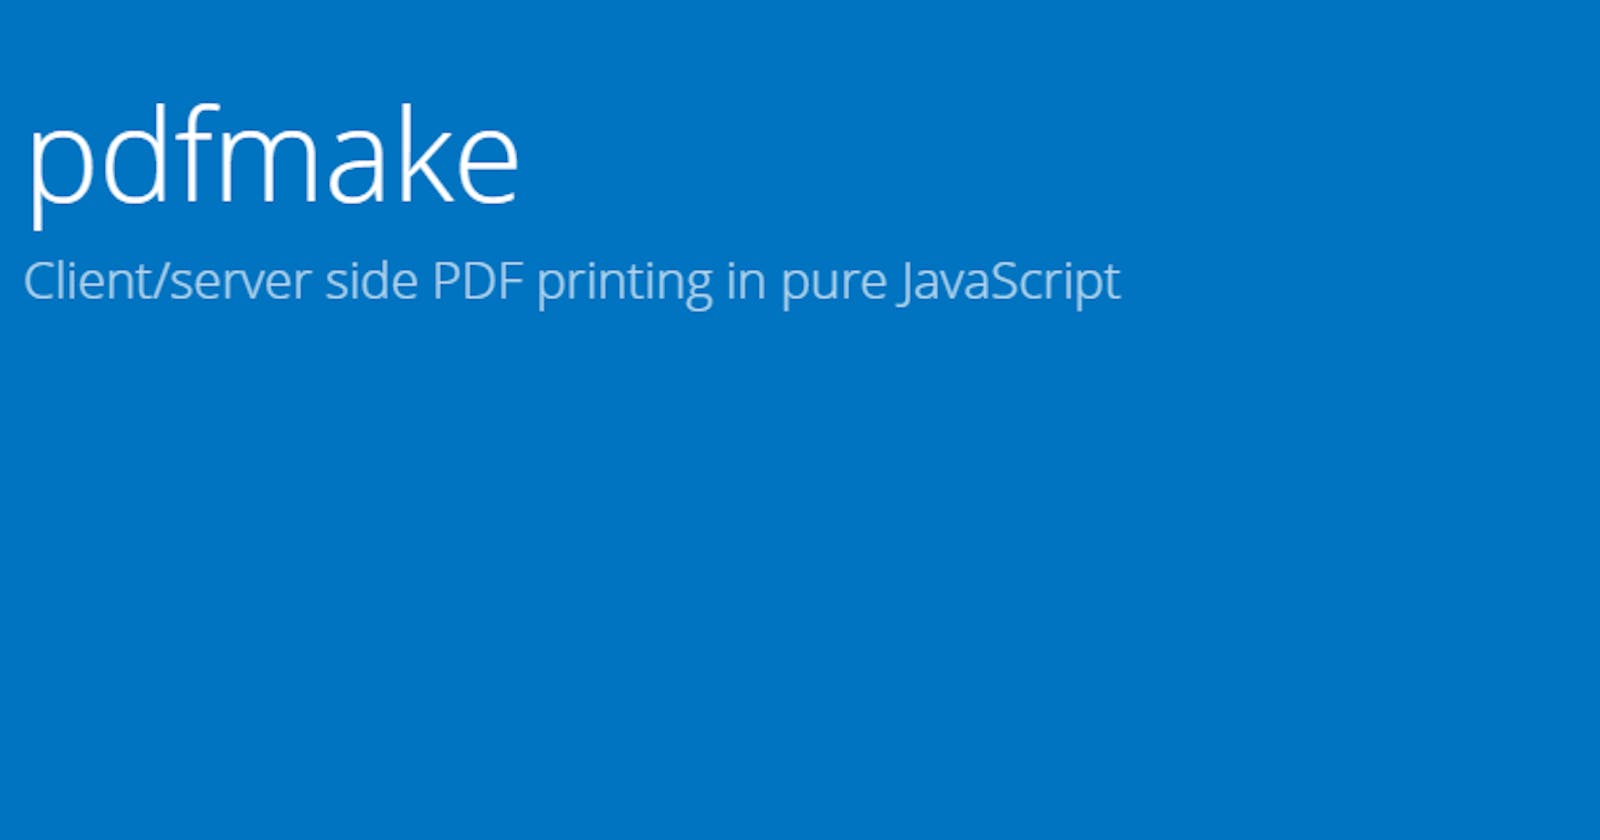 PDFMake: Getting started with PDF printing in pure javascript